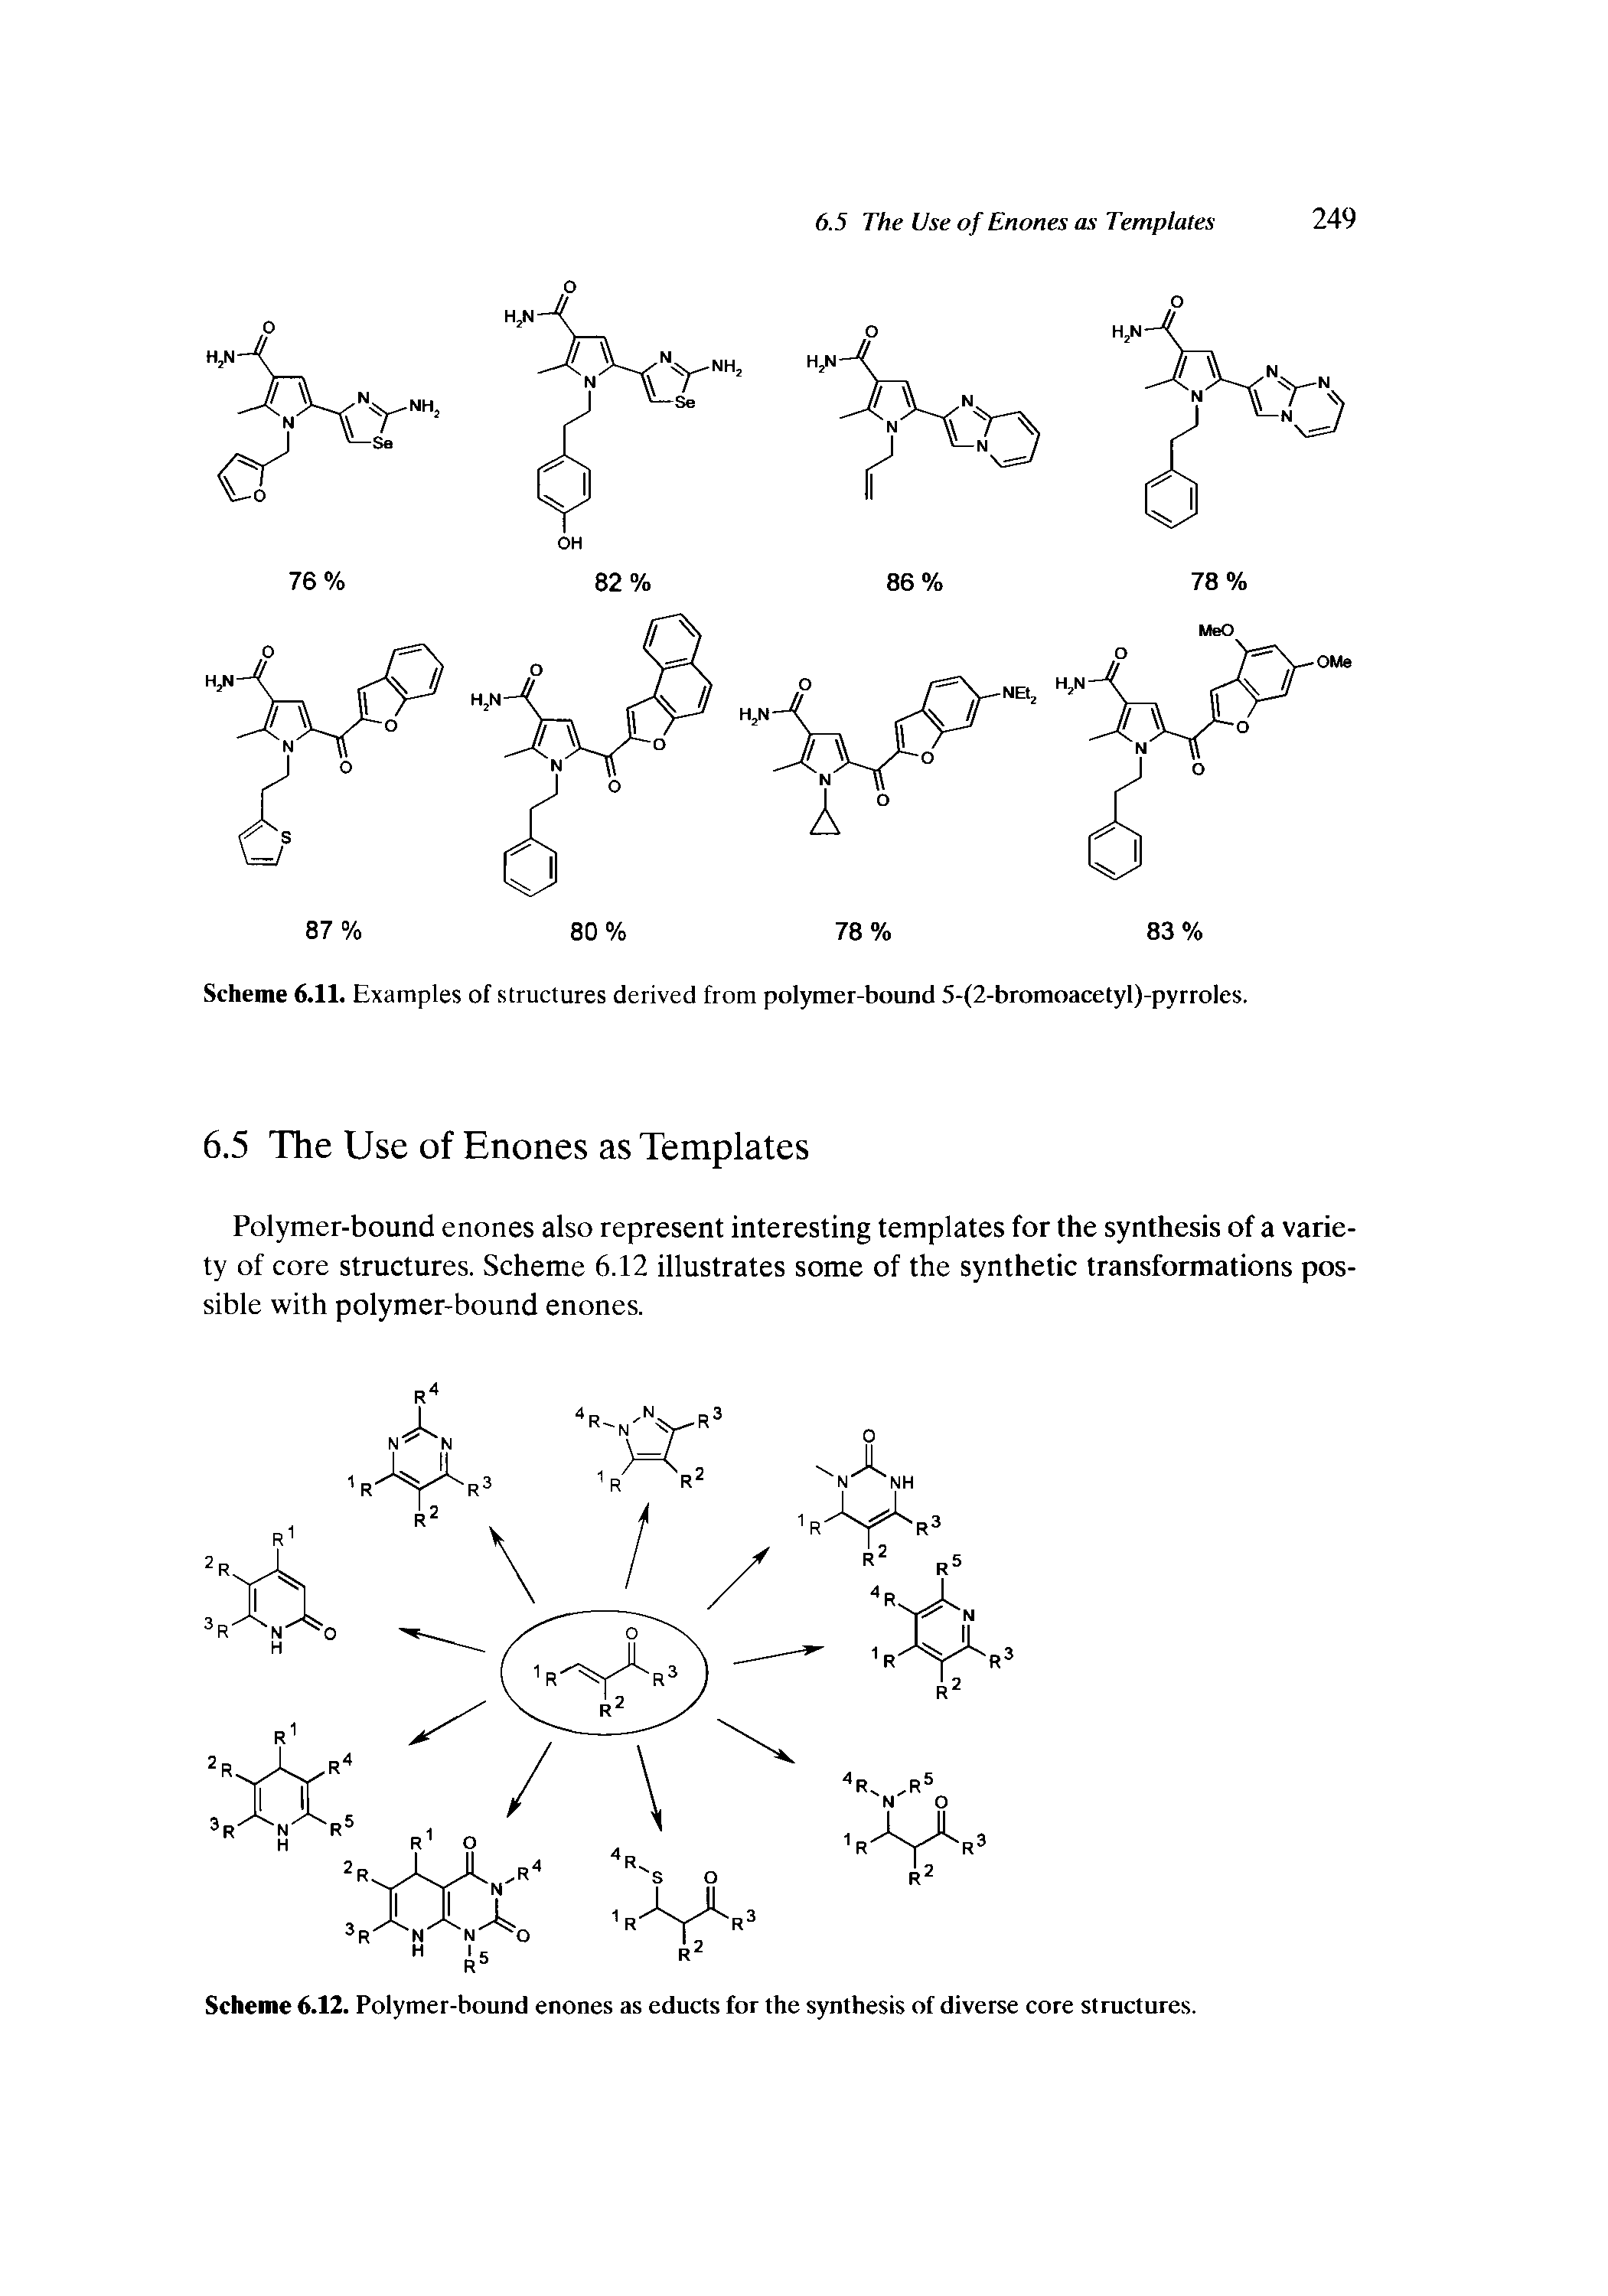 Scheme 6.11. Examples of structures derived from polymer-bound 5-(2-bromoacetyl)-pyrroles.